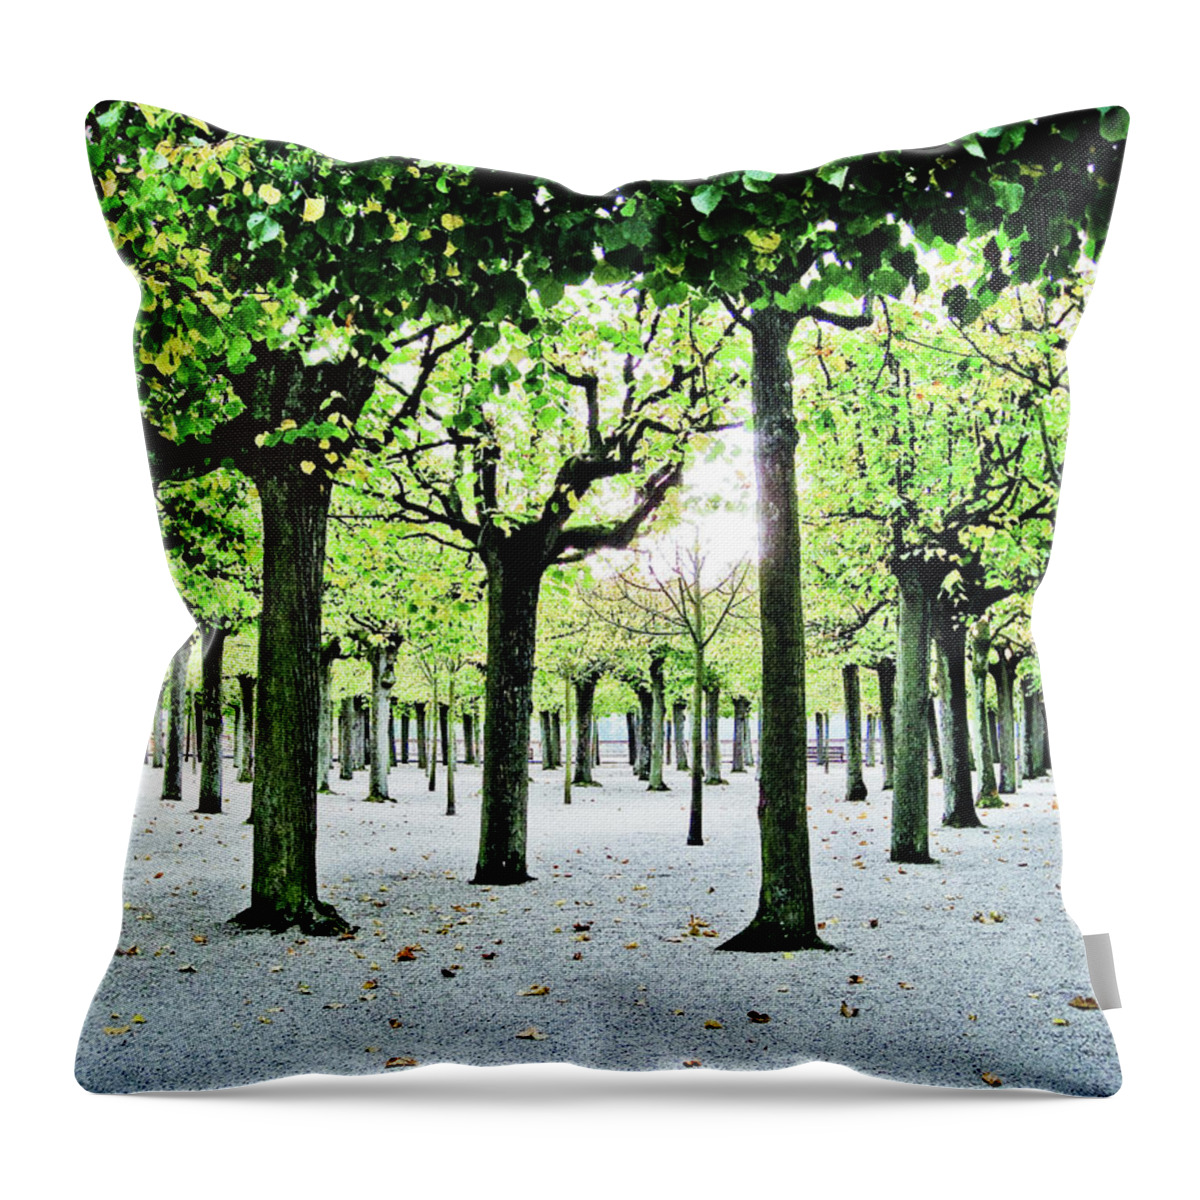 Tranquility Throw Pillow featuring the photograph Tree Canopy In Peaceful Garden by Bradpattersonphotography